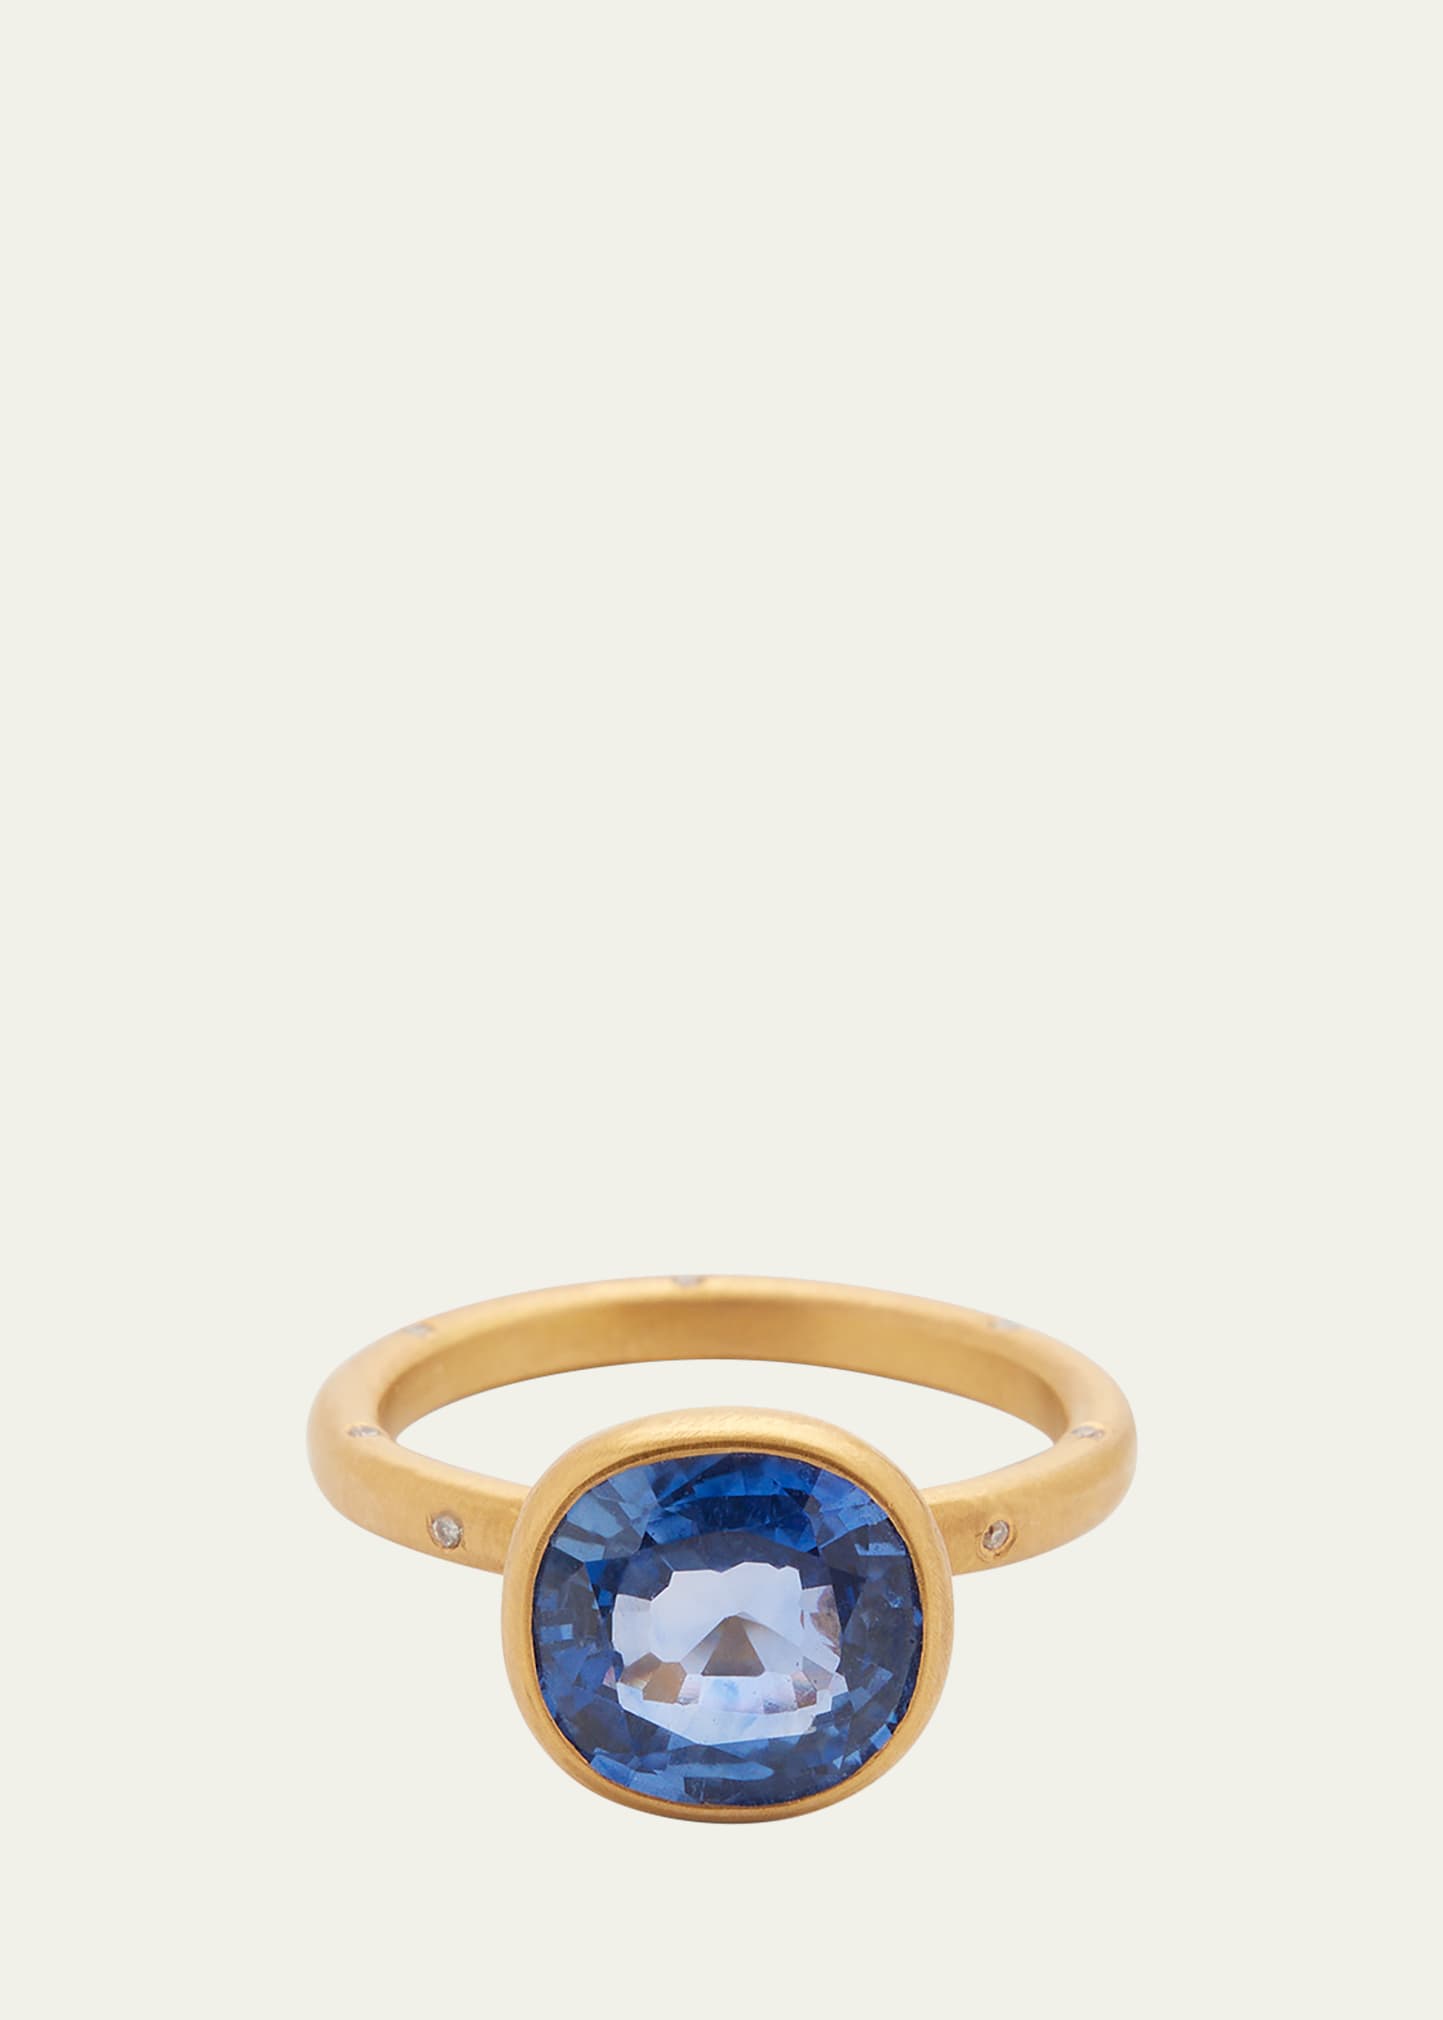 22K Gold Ring with Diamonds and Sapphire